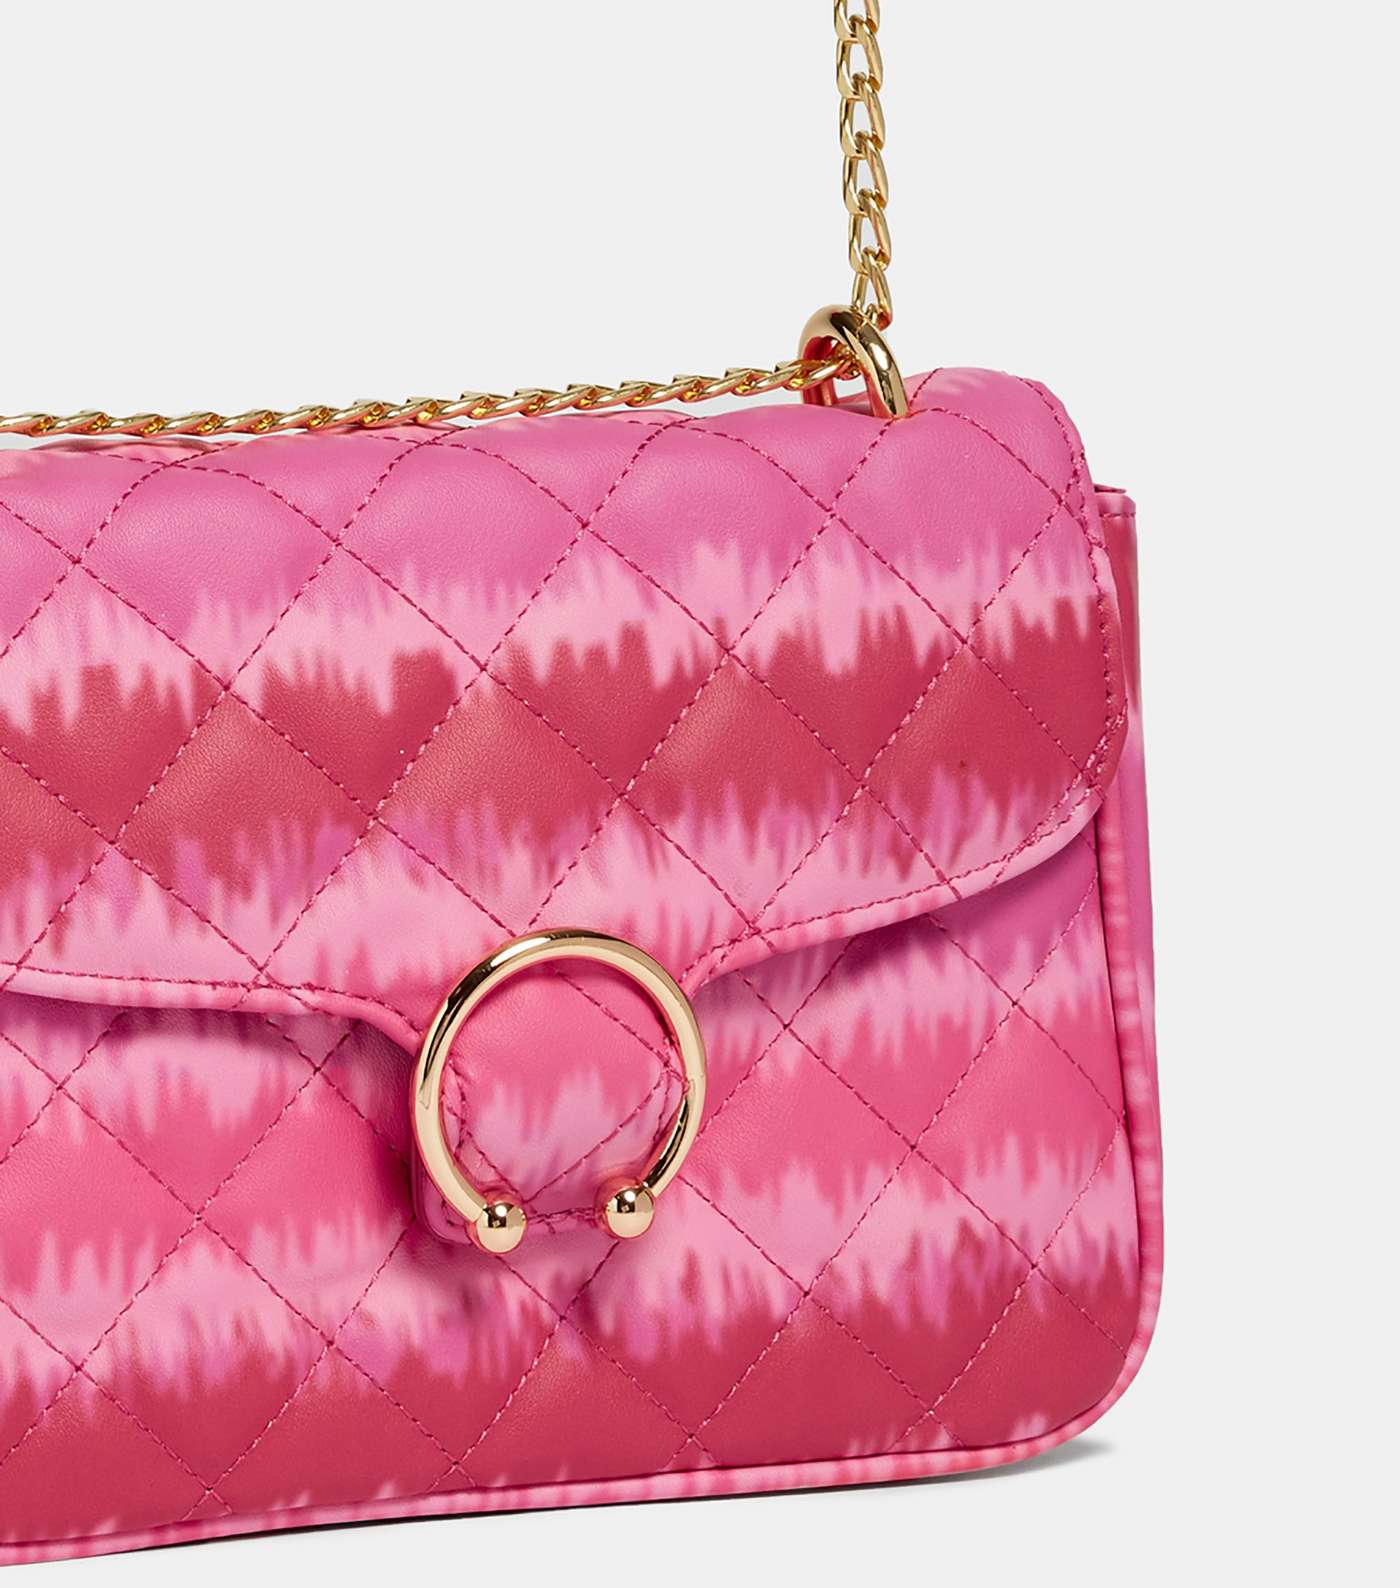 Skinnydip Pink Leather-Look Ombré Cross Body Bag Image 2